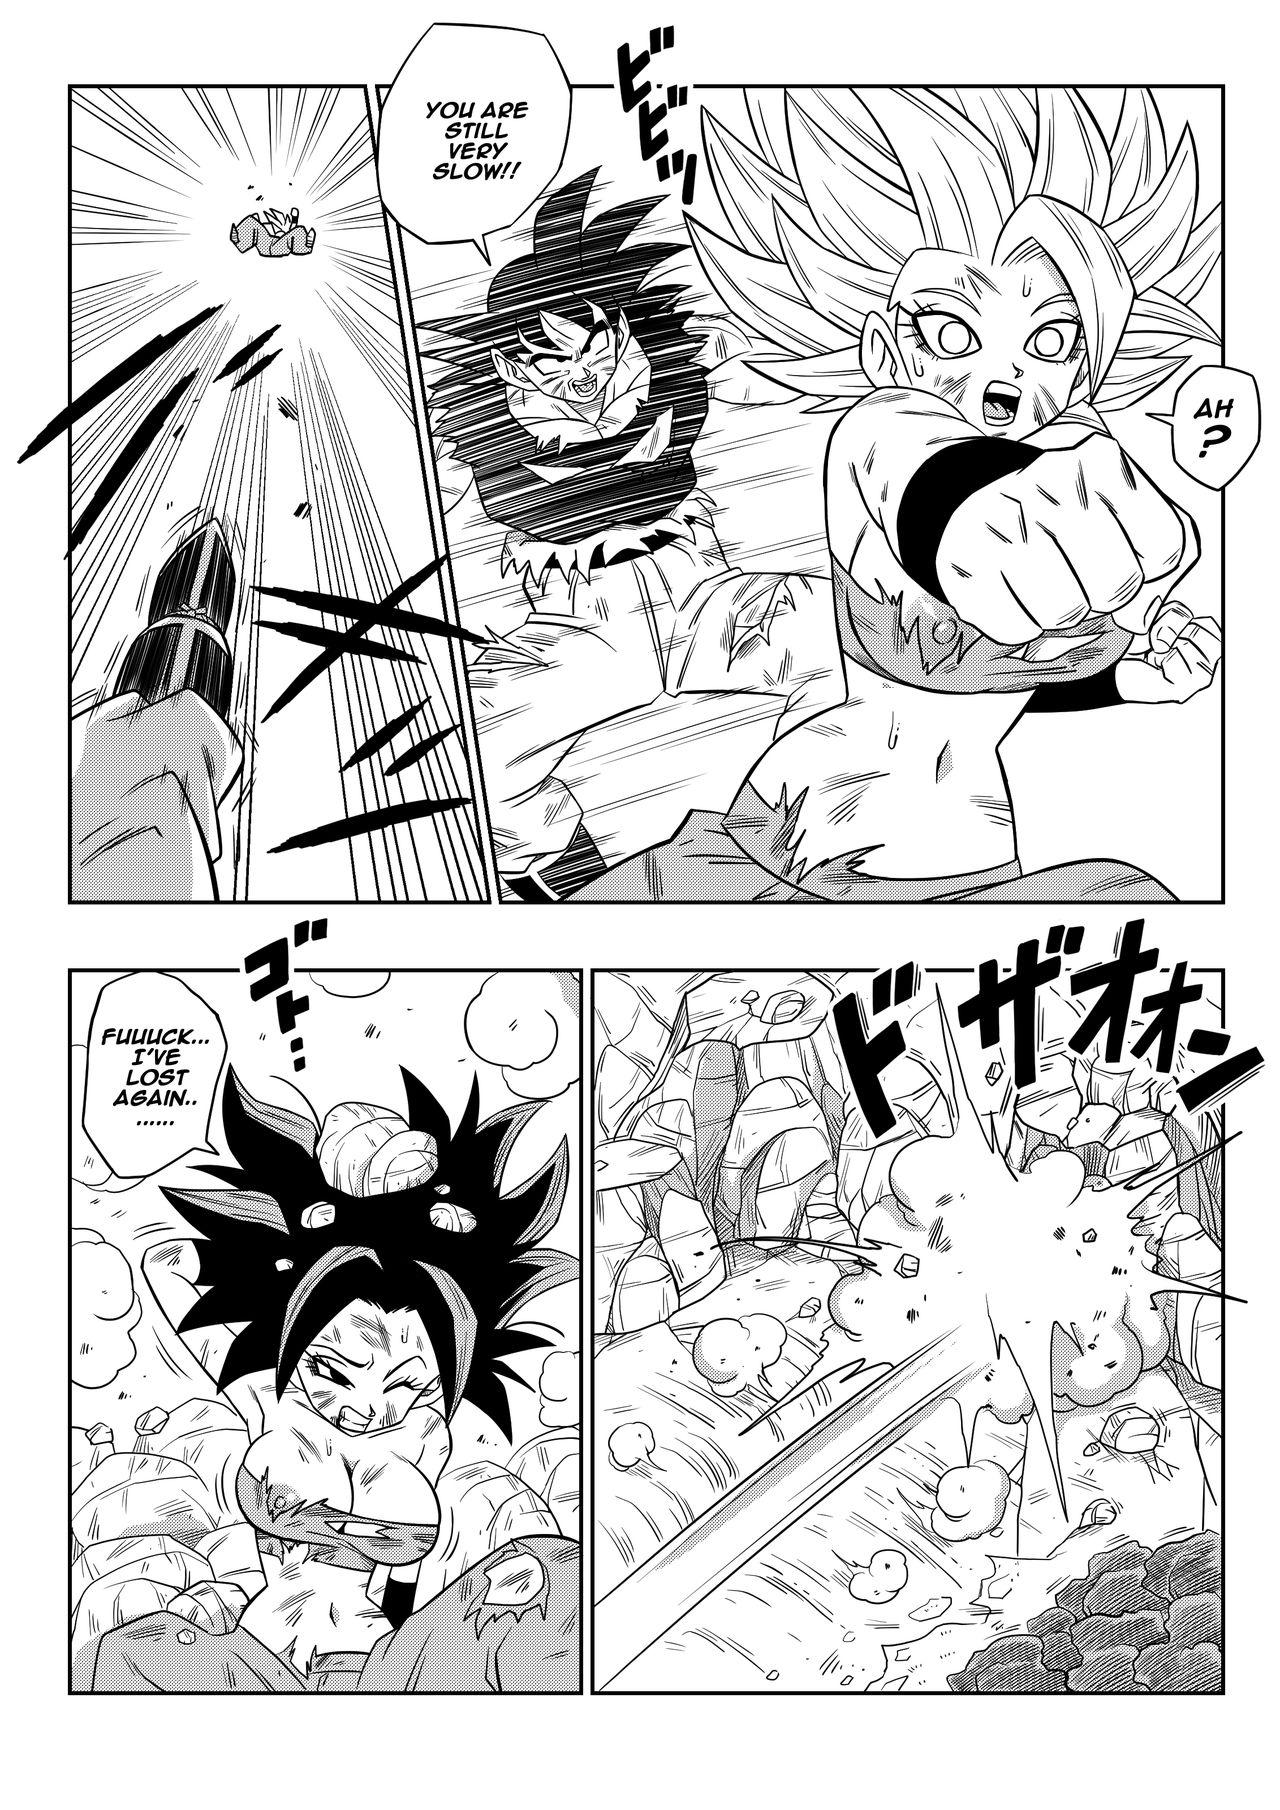 Squirt Fight in the 6th Universe!!! - Dragon ball super Hardcoresex - Page 5